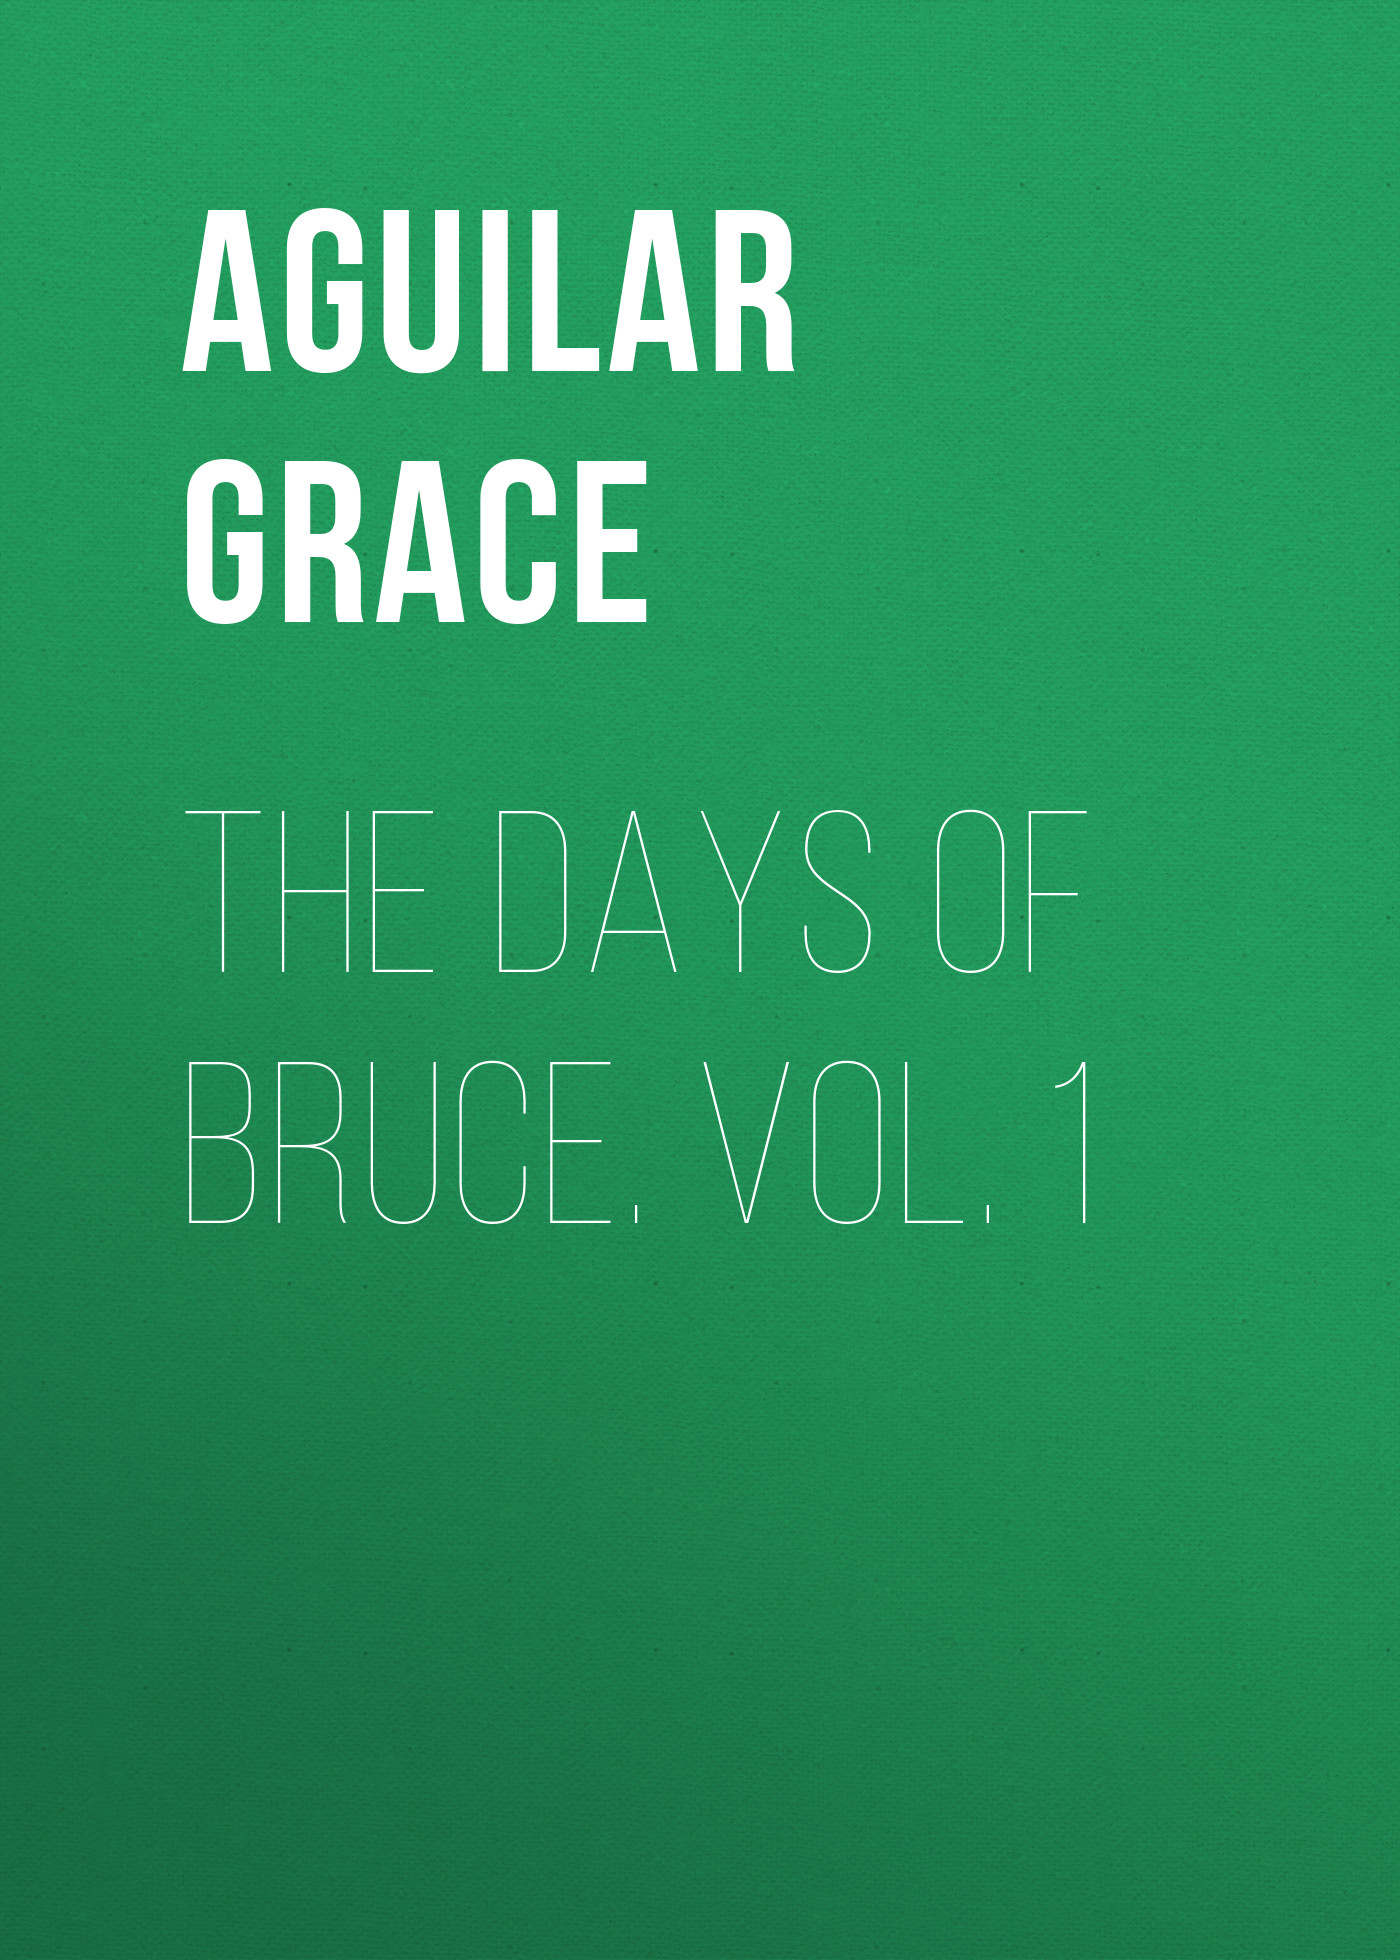 The Days of Bruce. Vol. 1